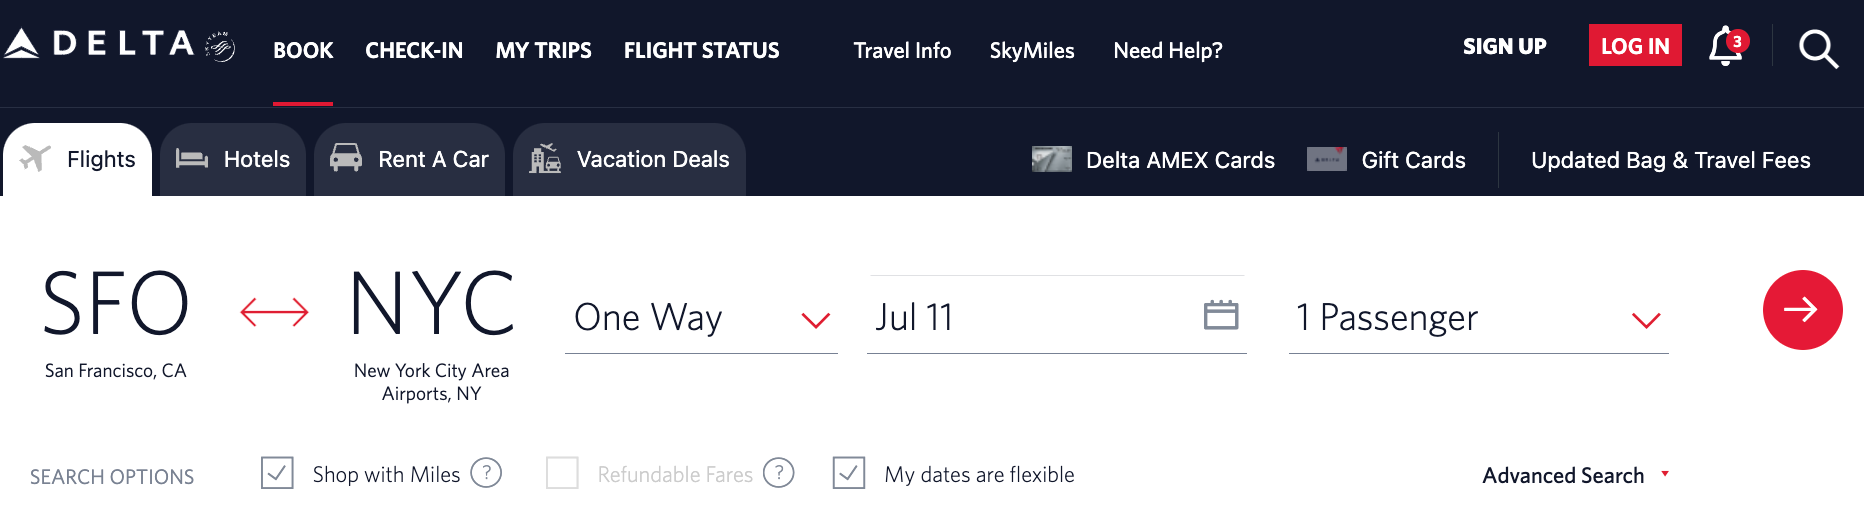 Searching for Delta award space from SFO to NYC